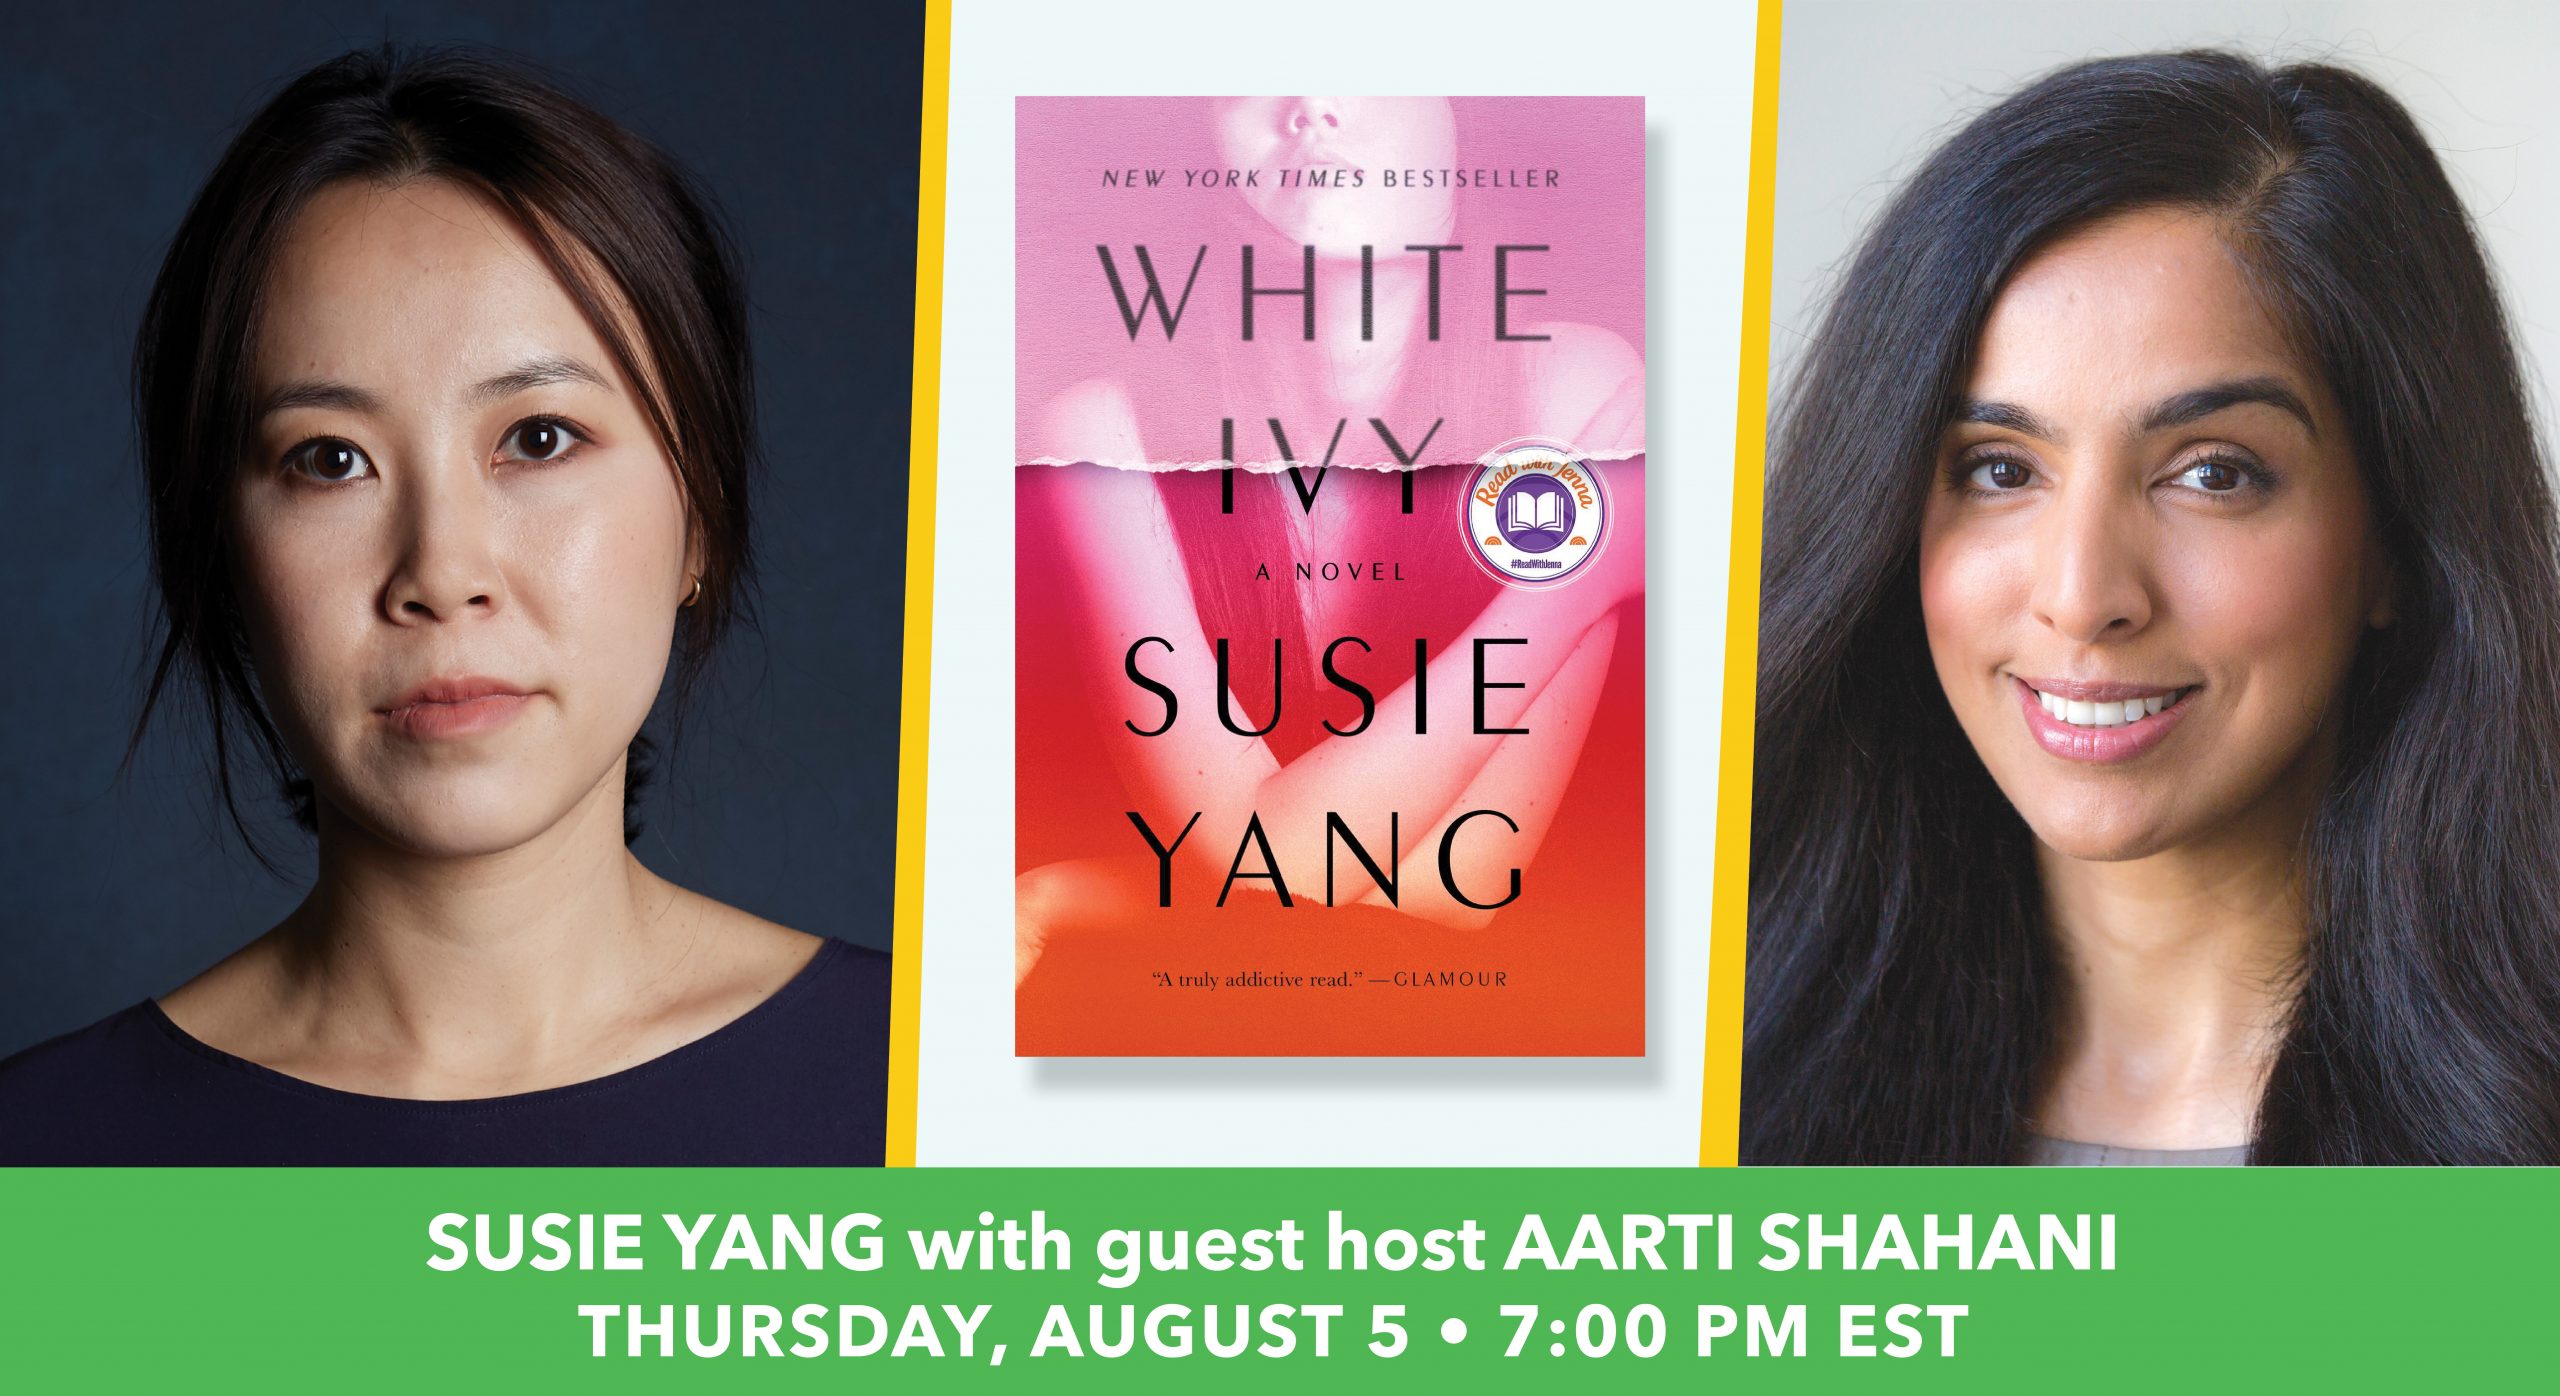 PRESS RELEASE: An Evening with Susie Yang